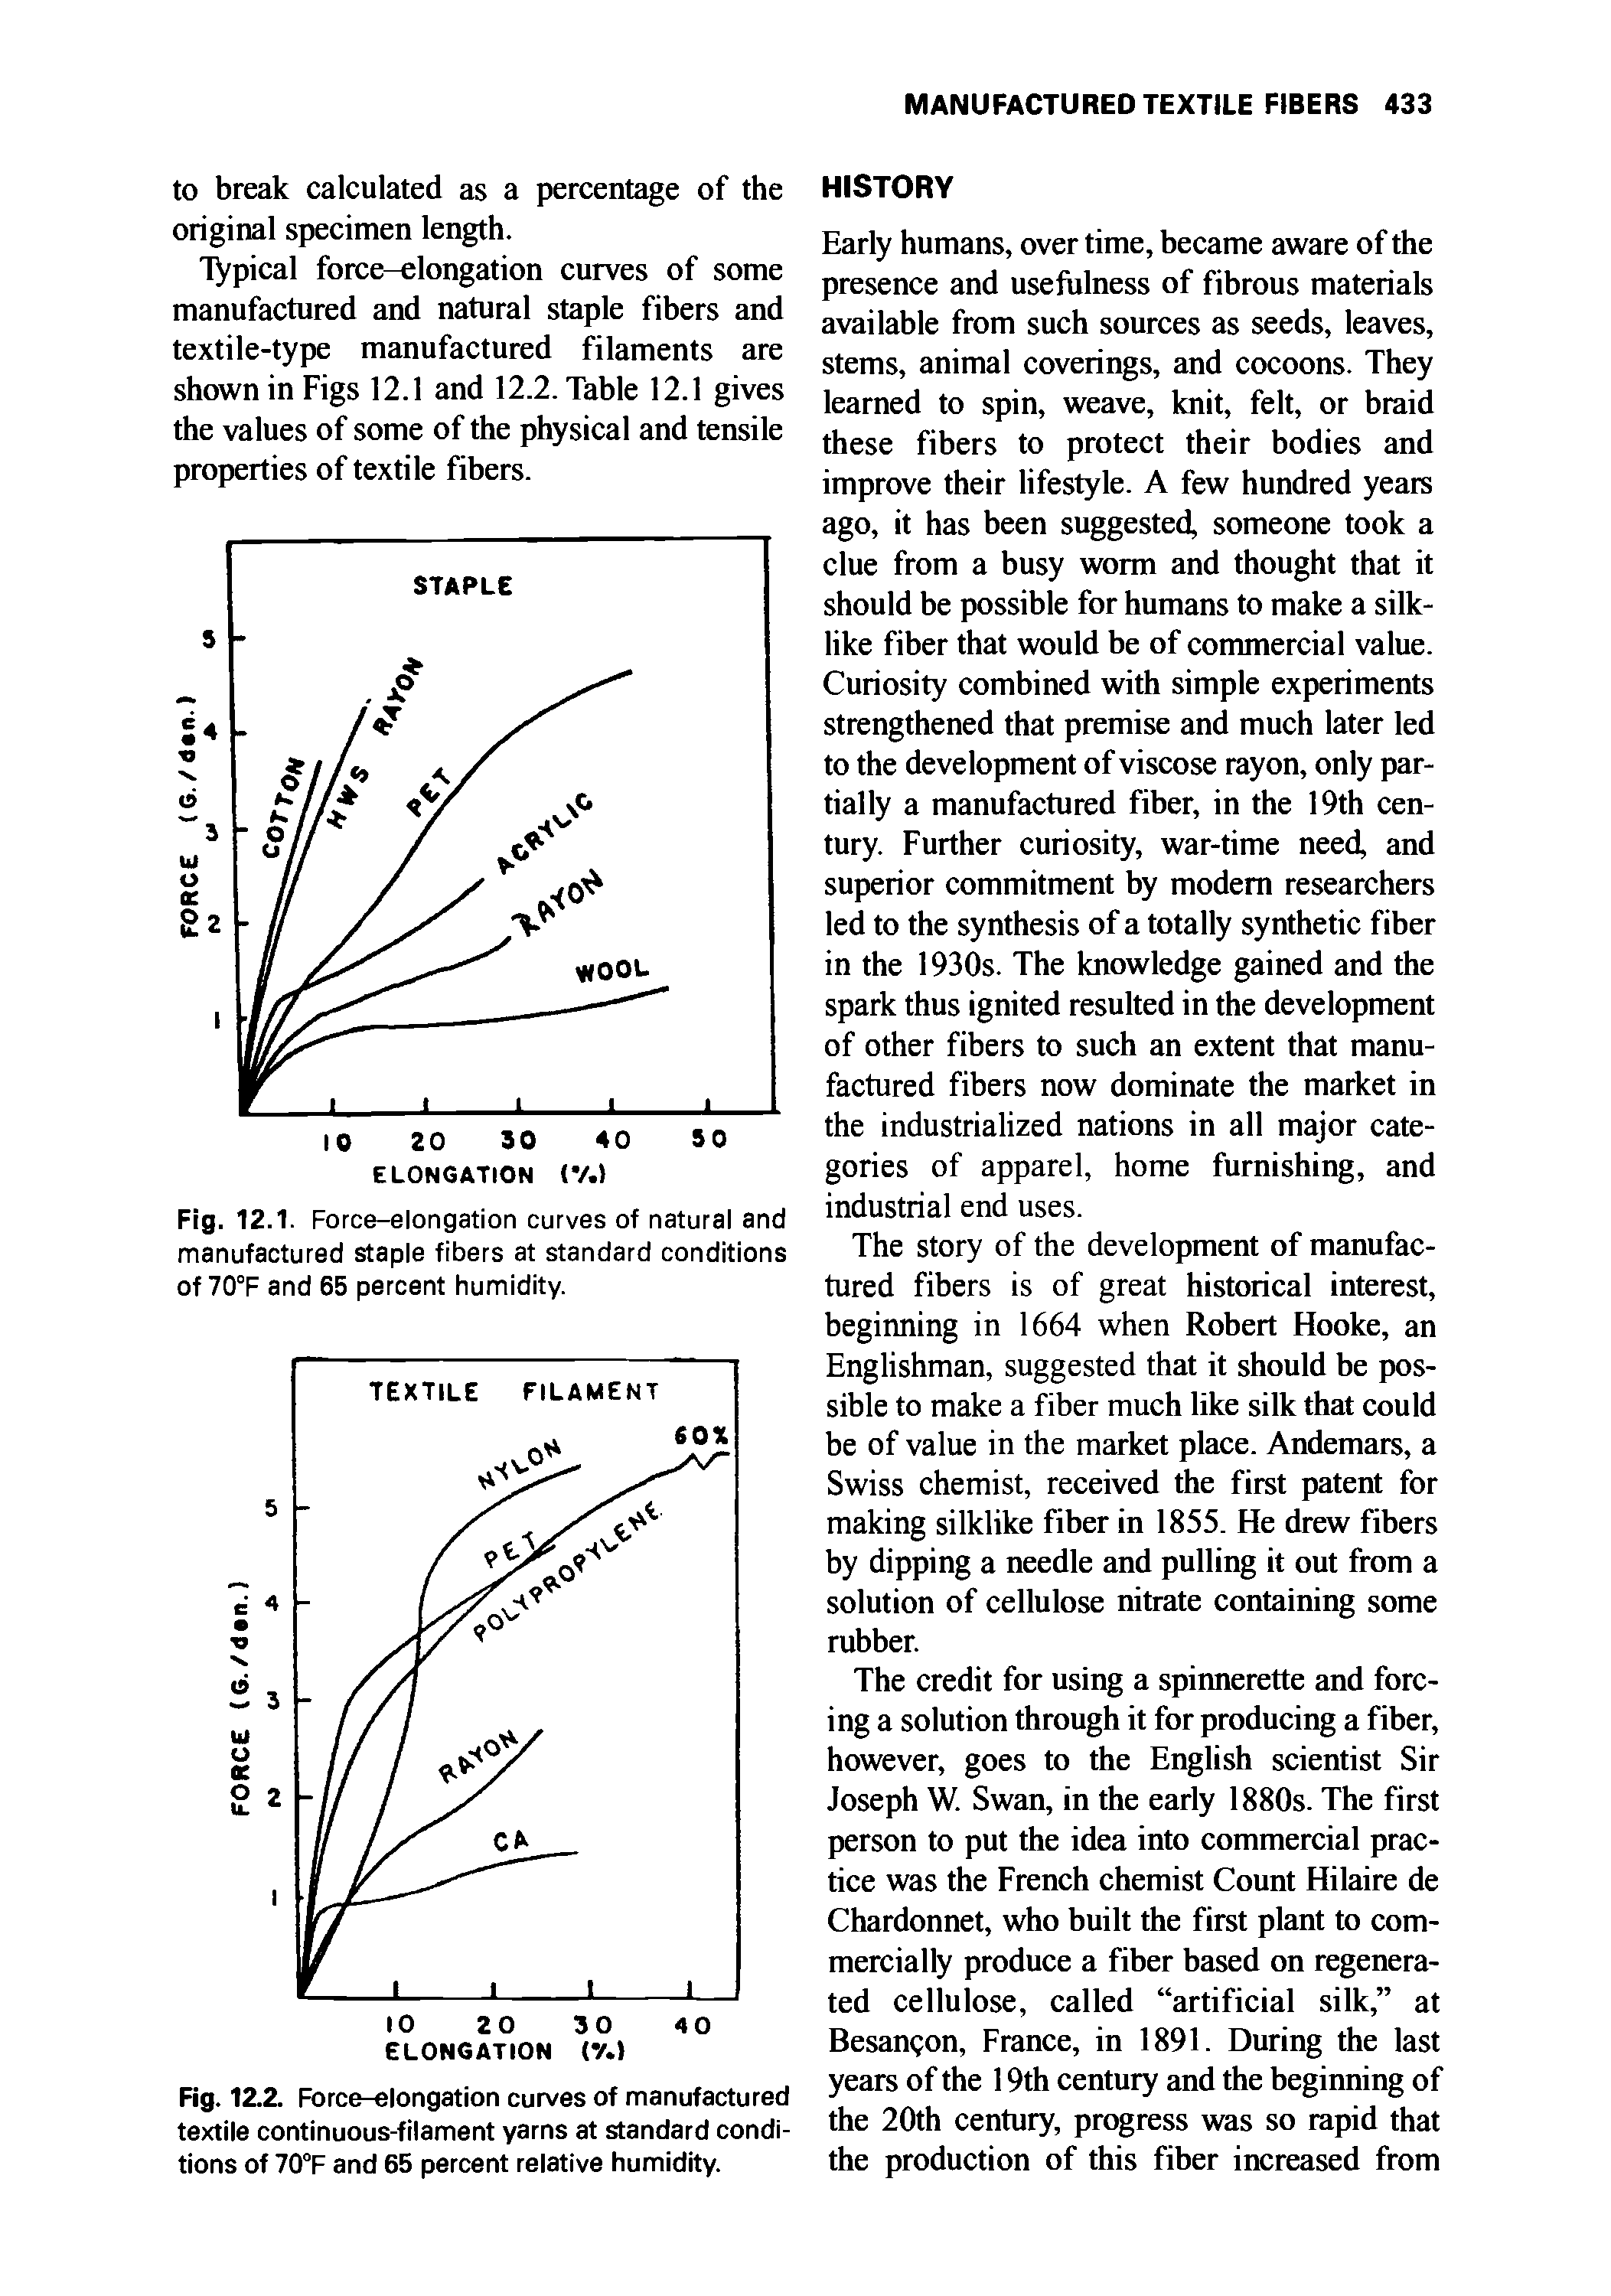 Fig. 12.2. Force-elongation curves of manufactured textile continuous-filament yarns at standard conditions of 70°F and 65 percent relative humidity.